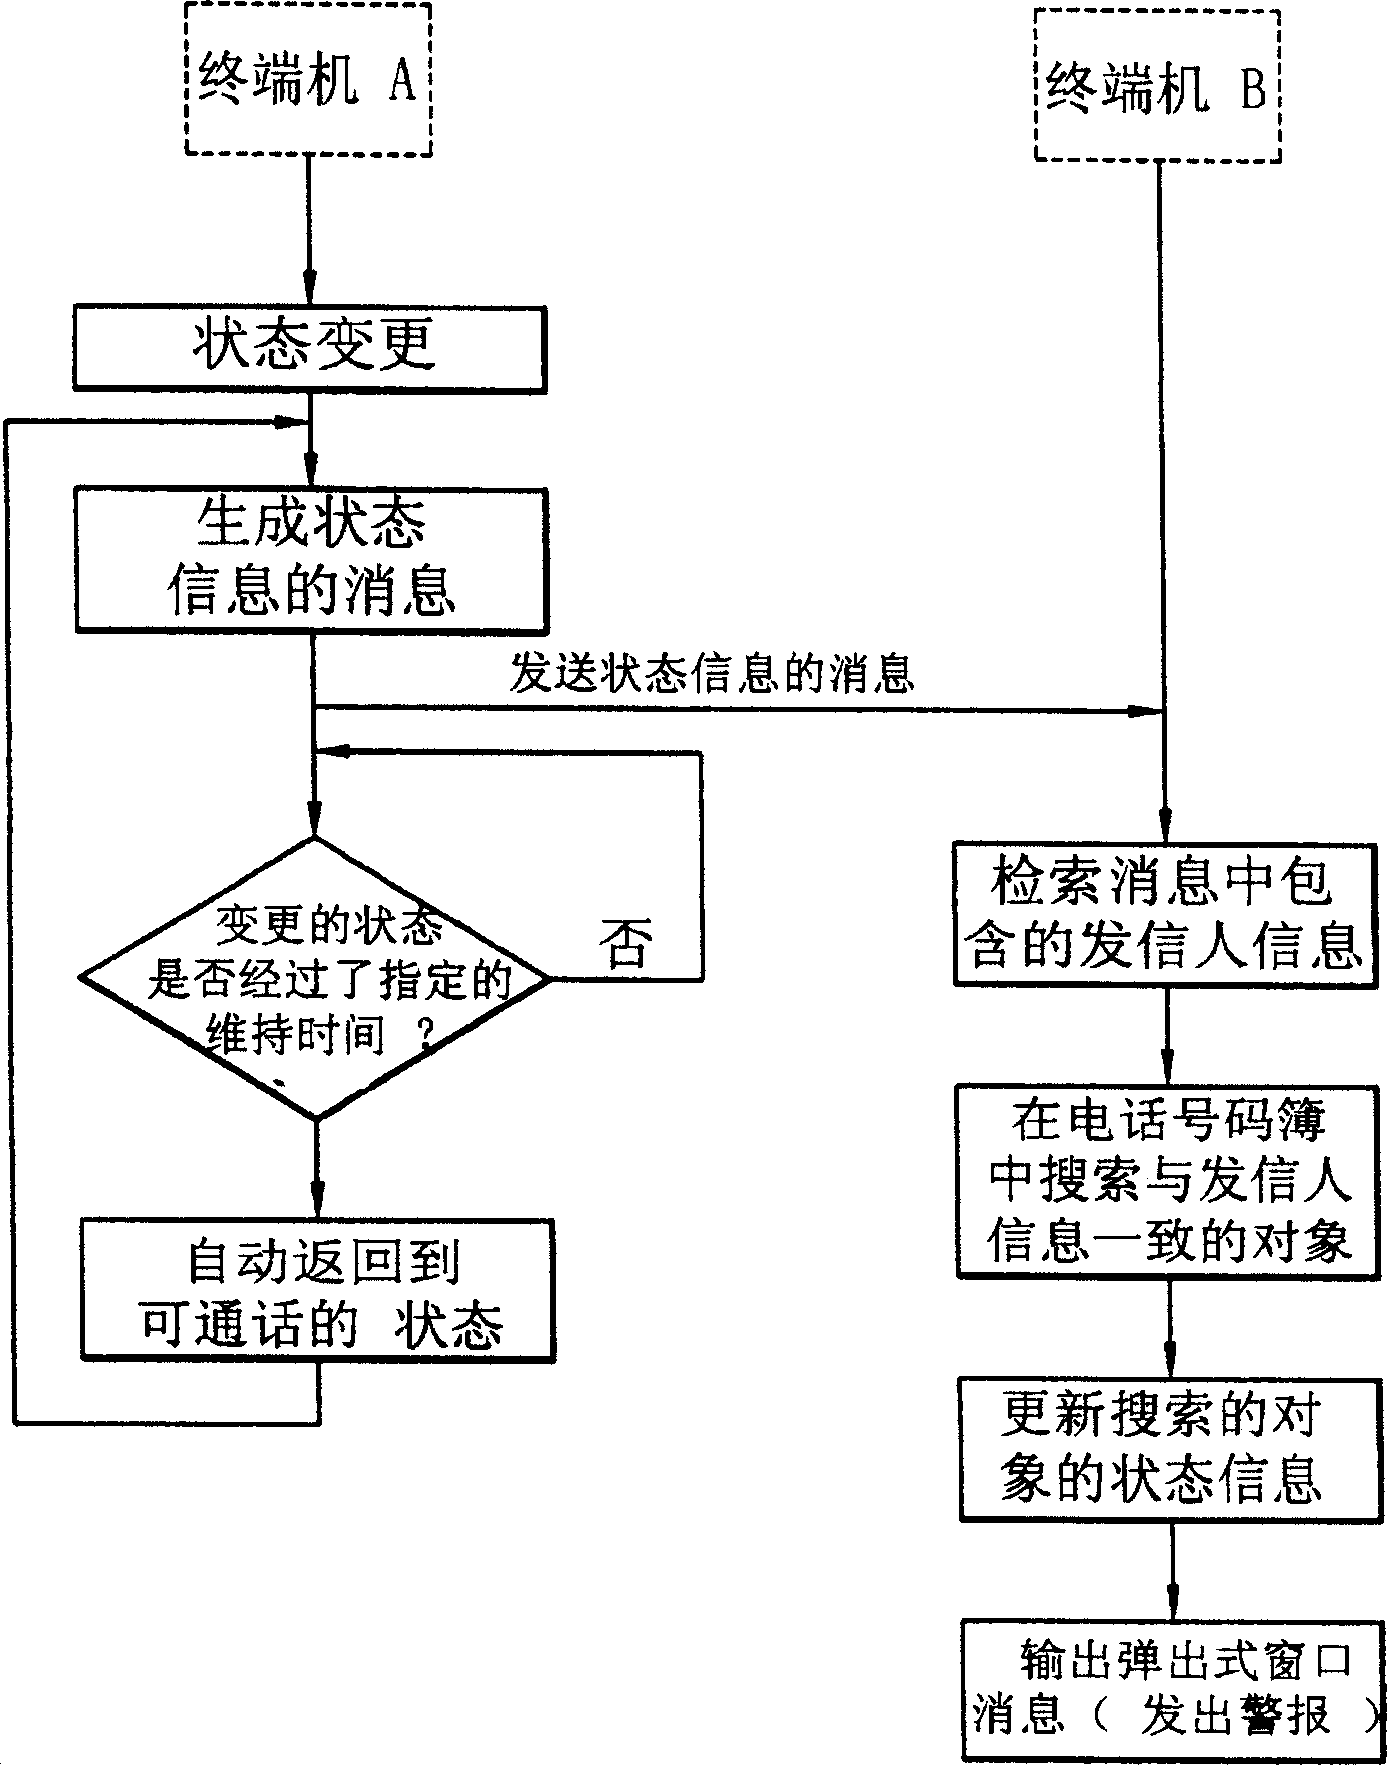 Method of transferring user state by using portable communication terminal short messege